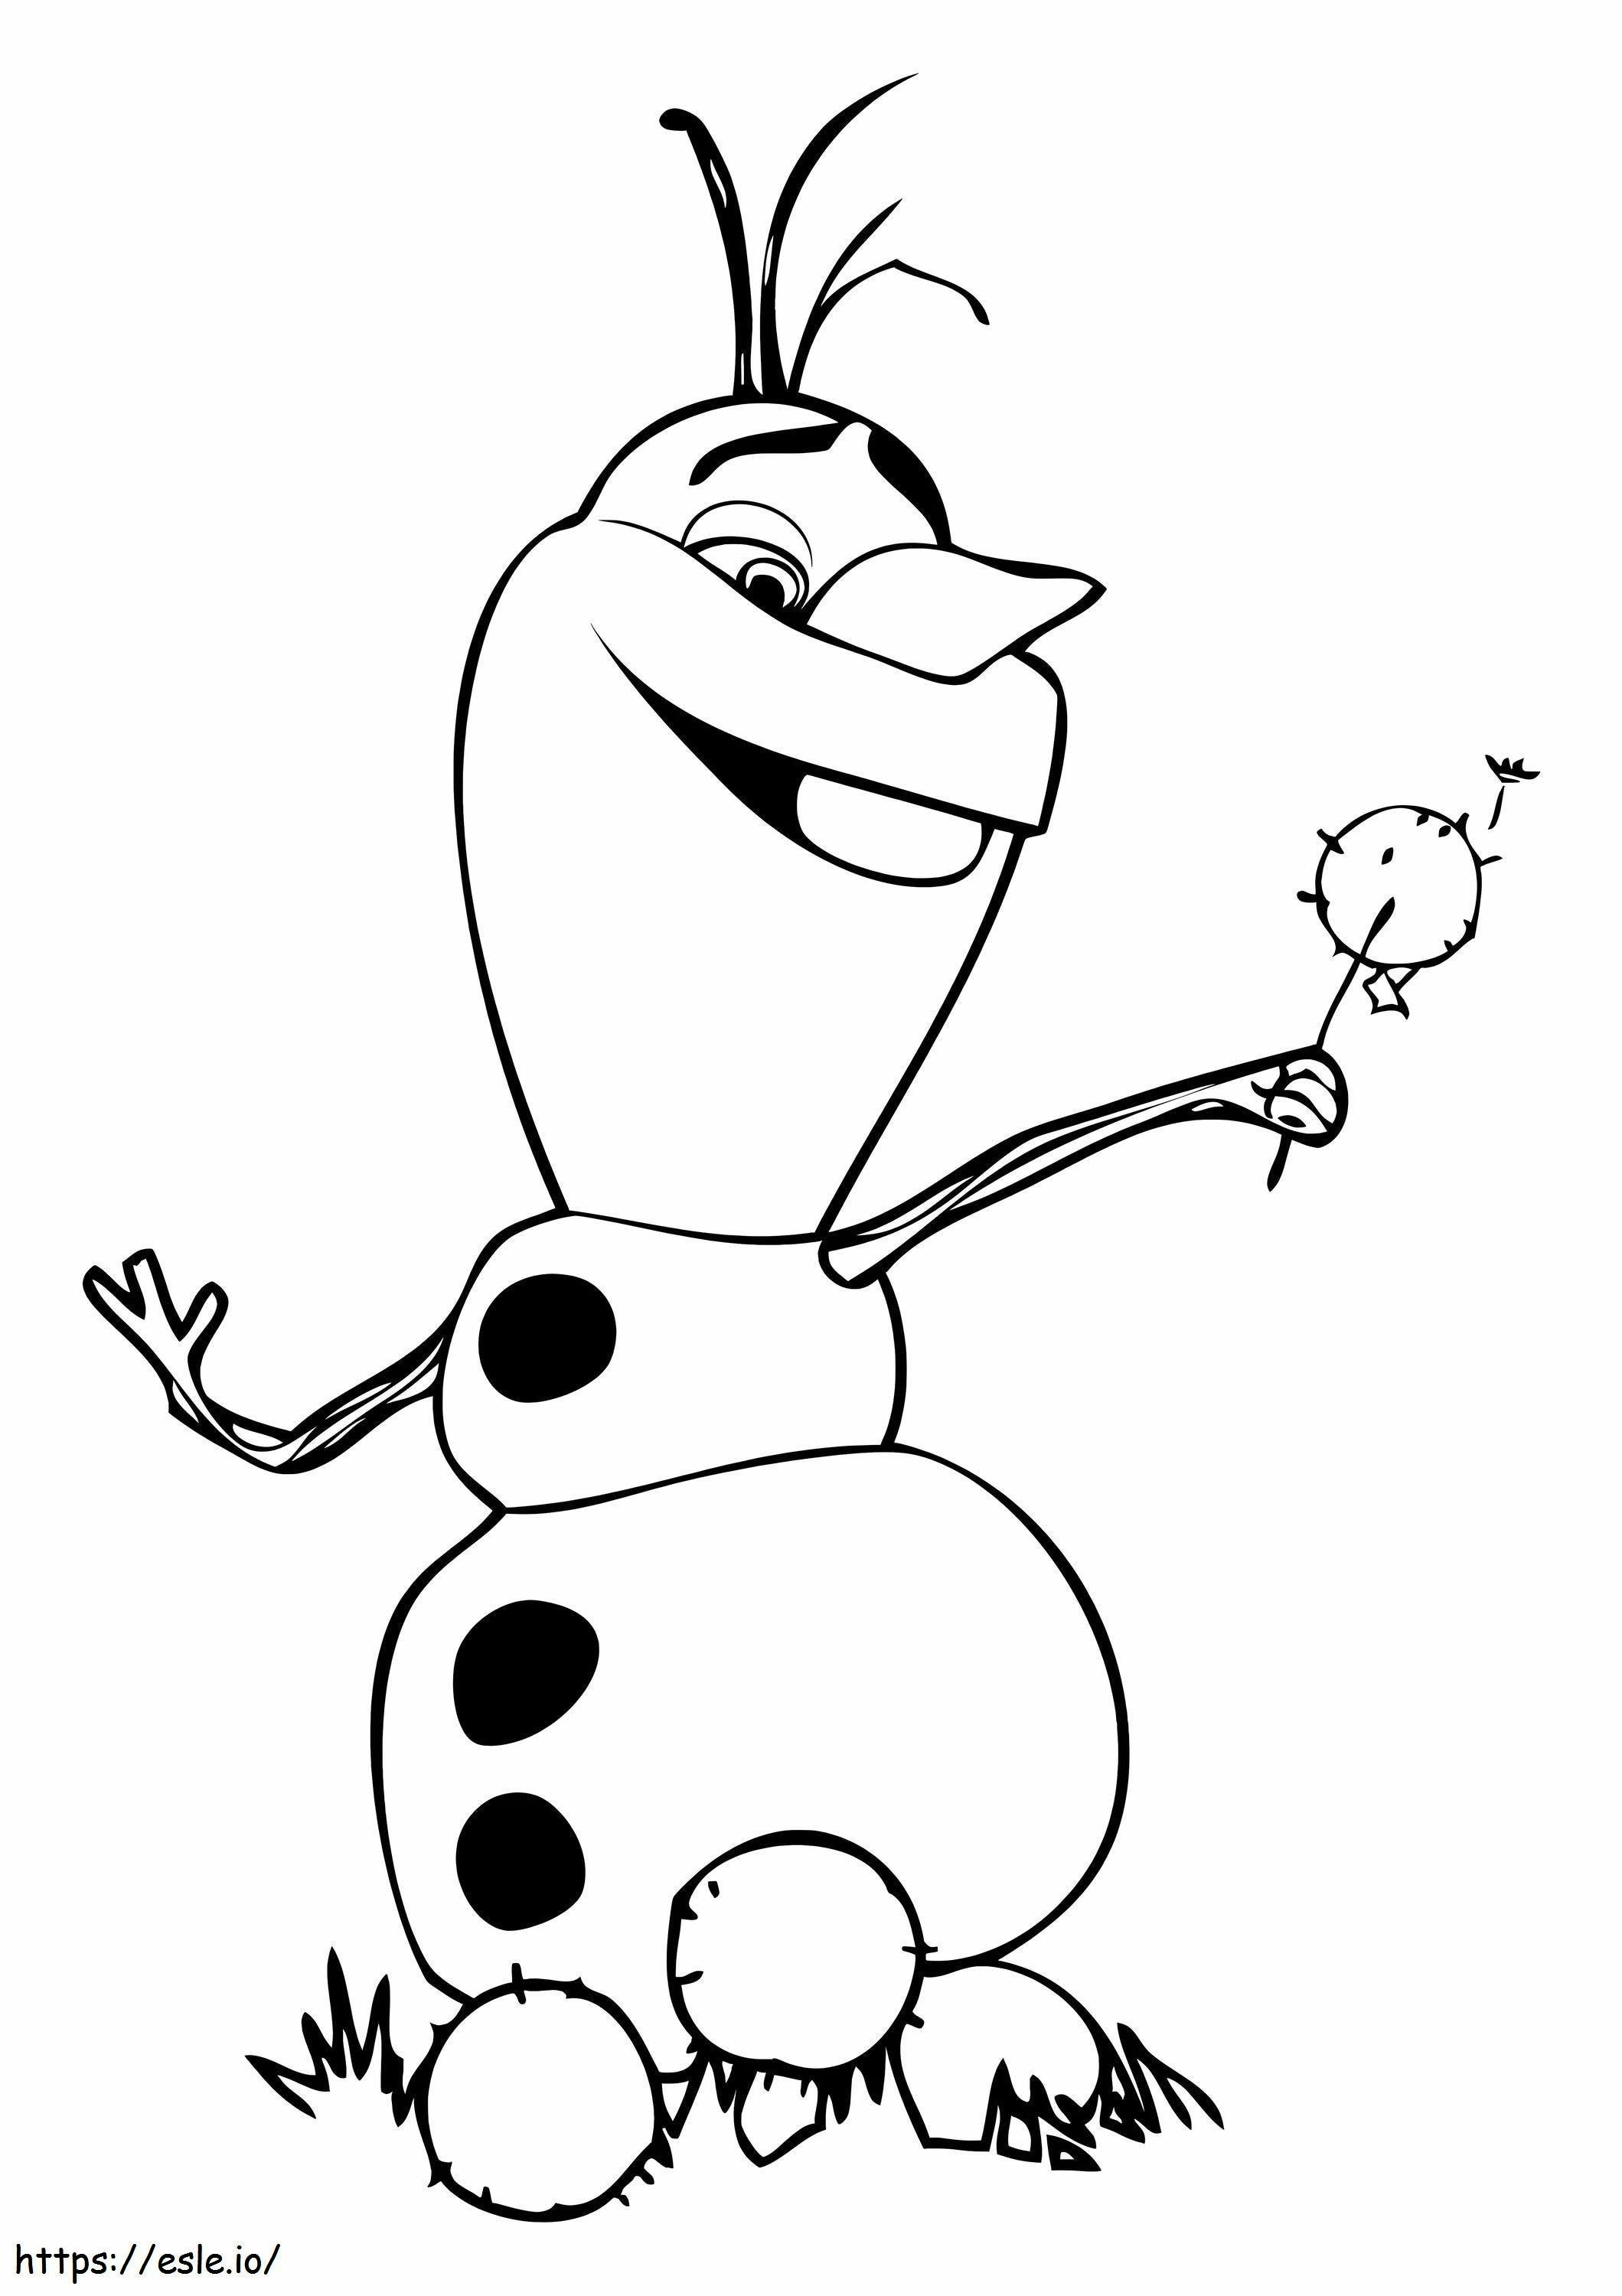 Adorable Olaf coloring page